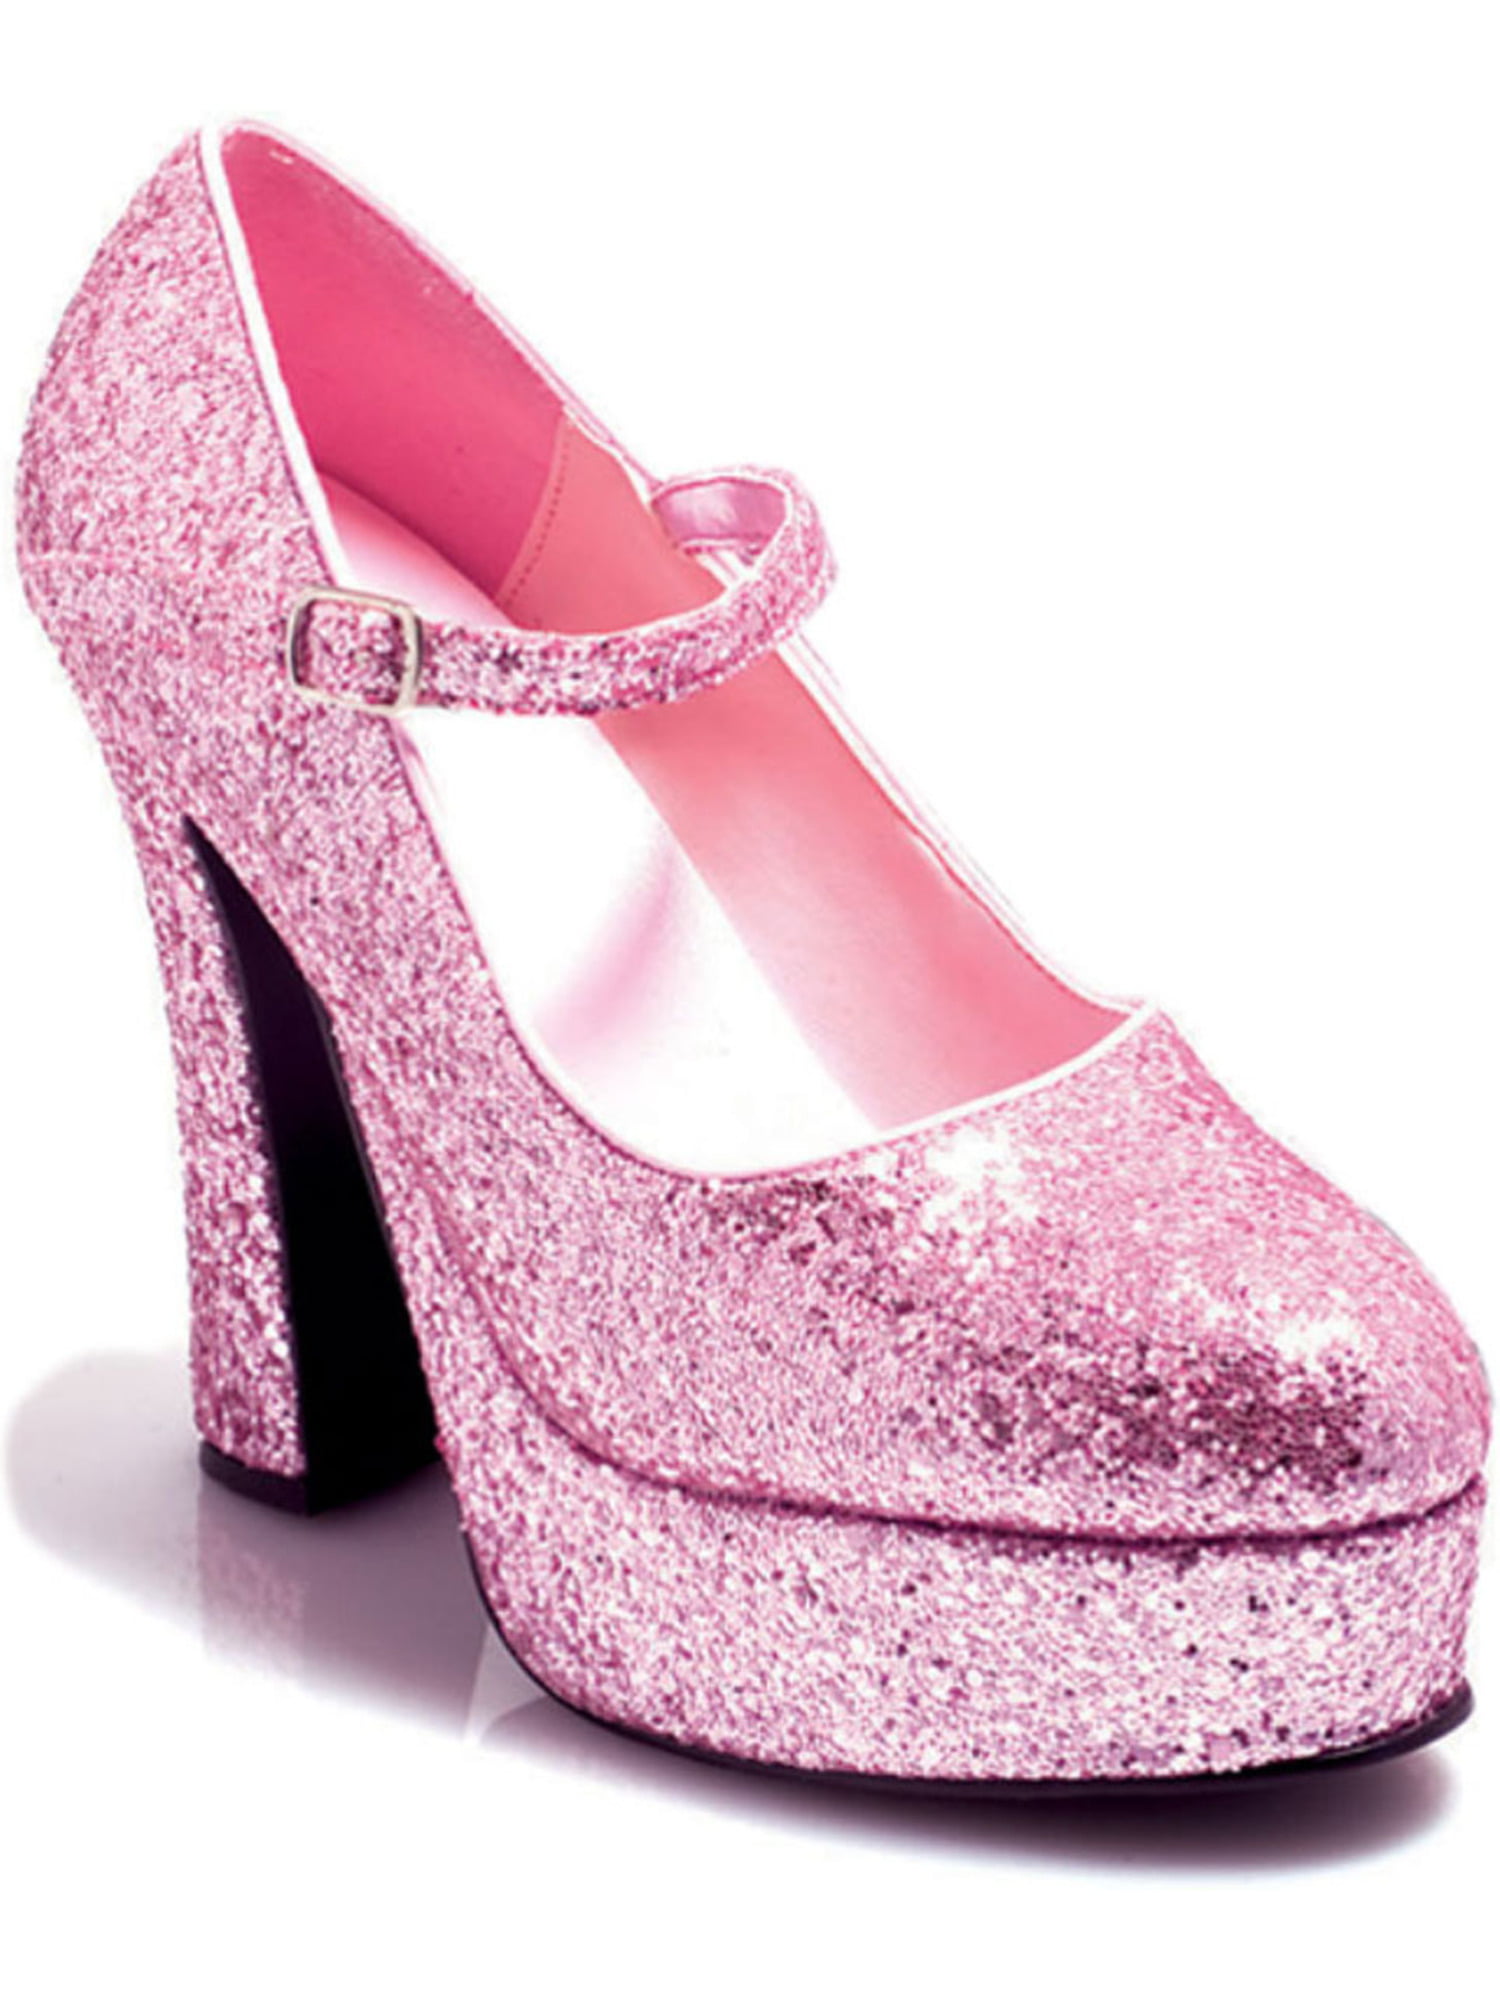 pink glitter mary jane shoes